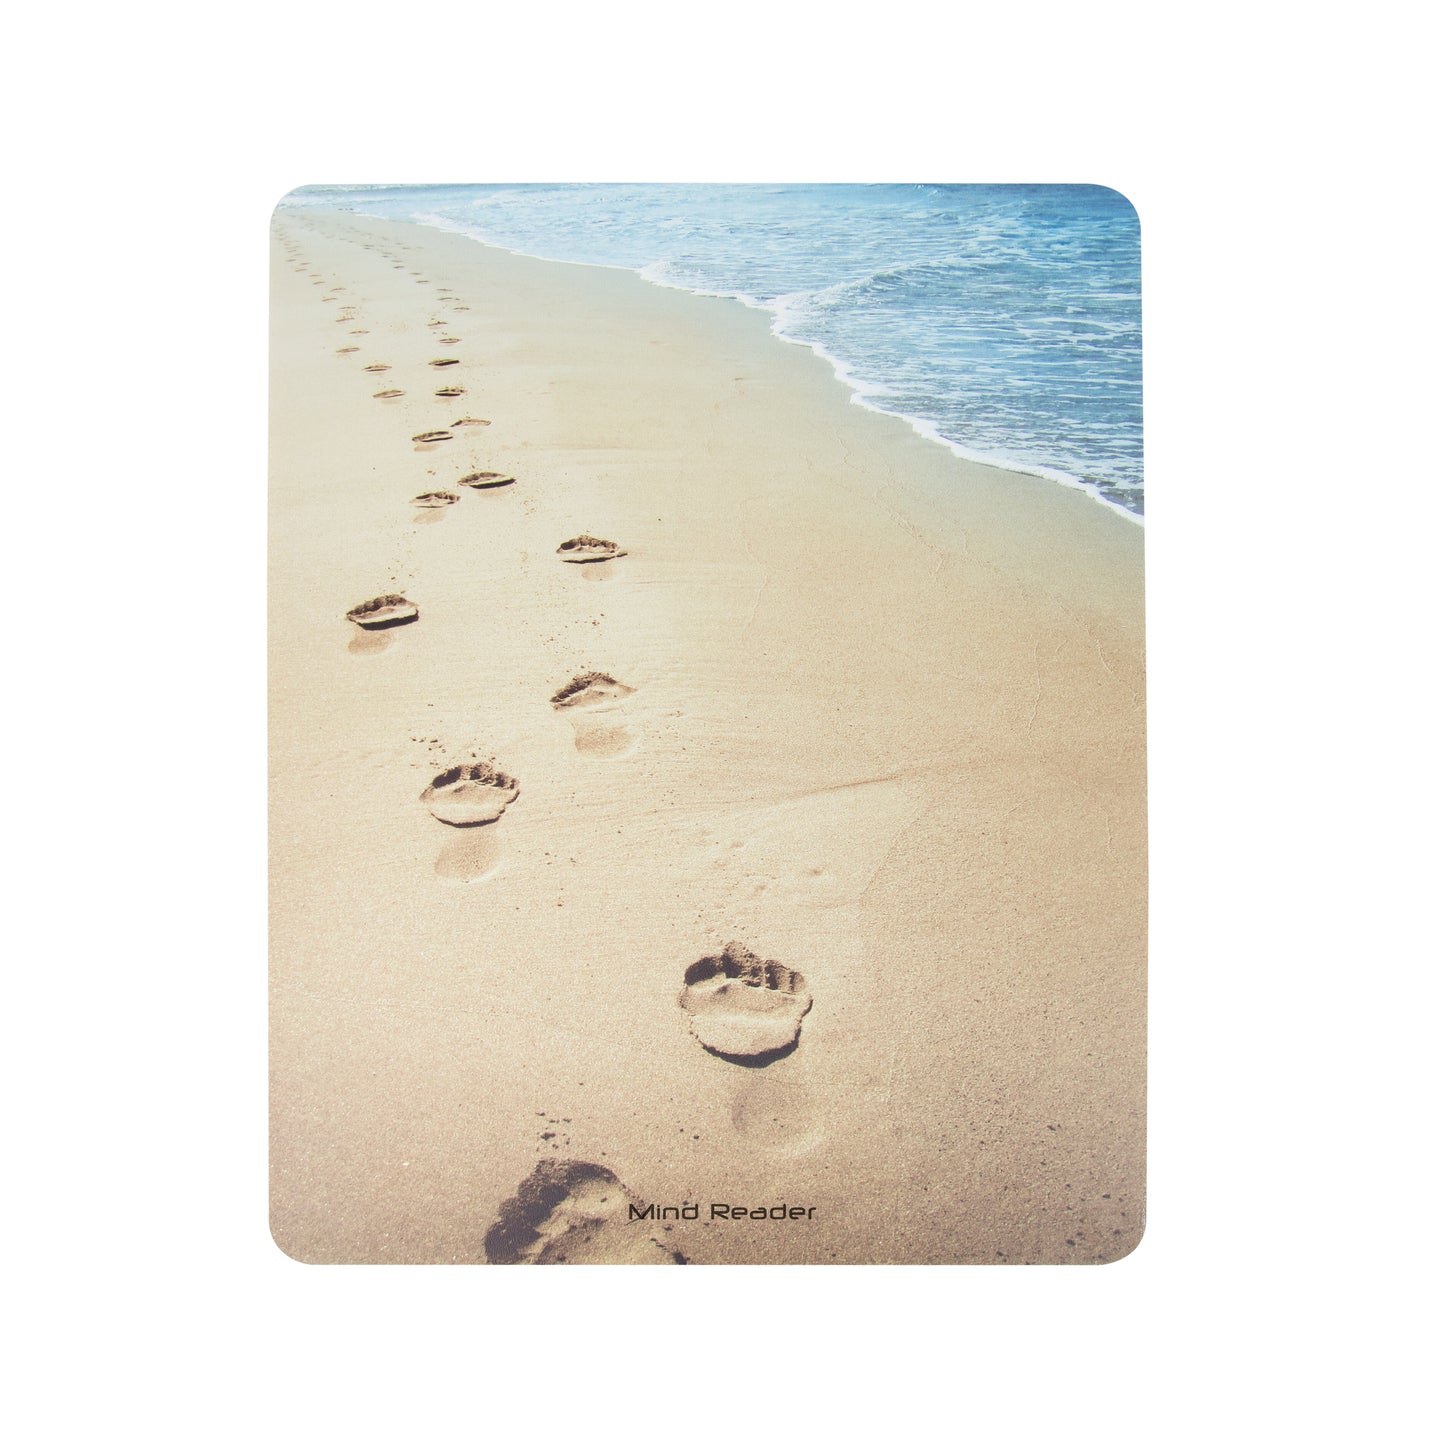 Mind Reader 9-to-5 Collection, Office Chair Mat, Anti-Skid Floor Protector, 47.25 x 35.25, PVC, Life's a Beach Art, Tan